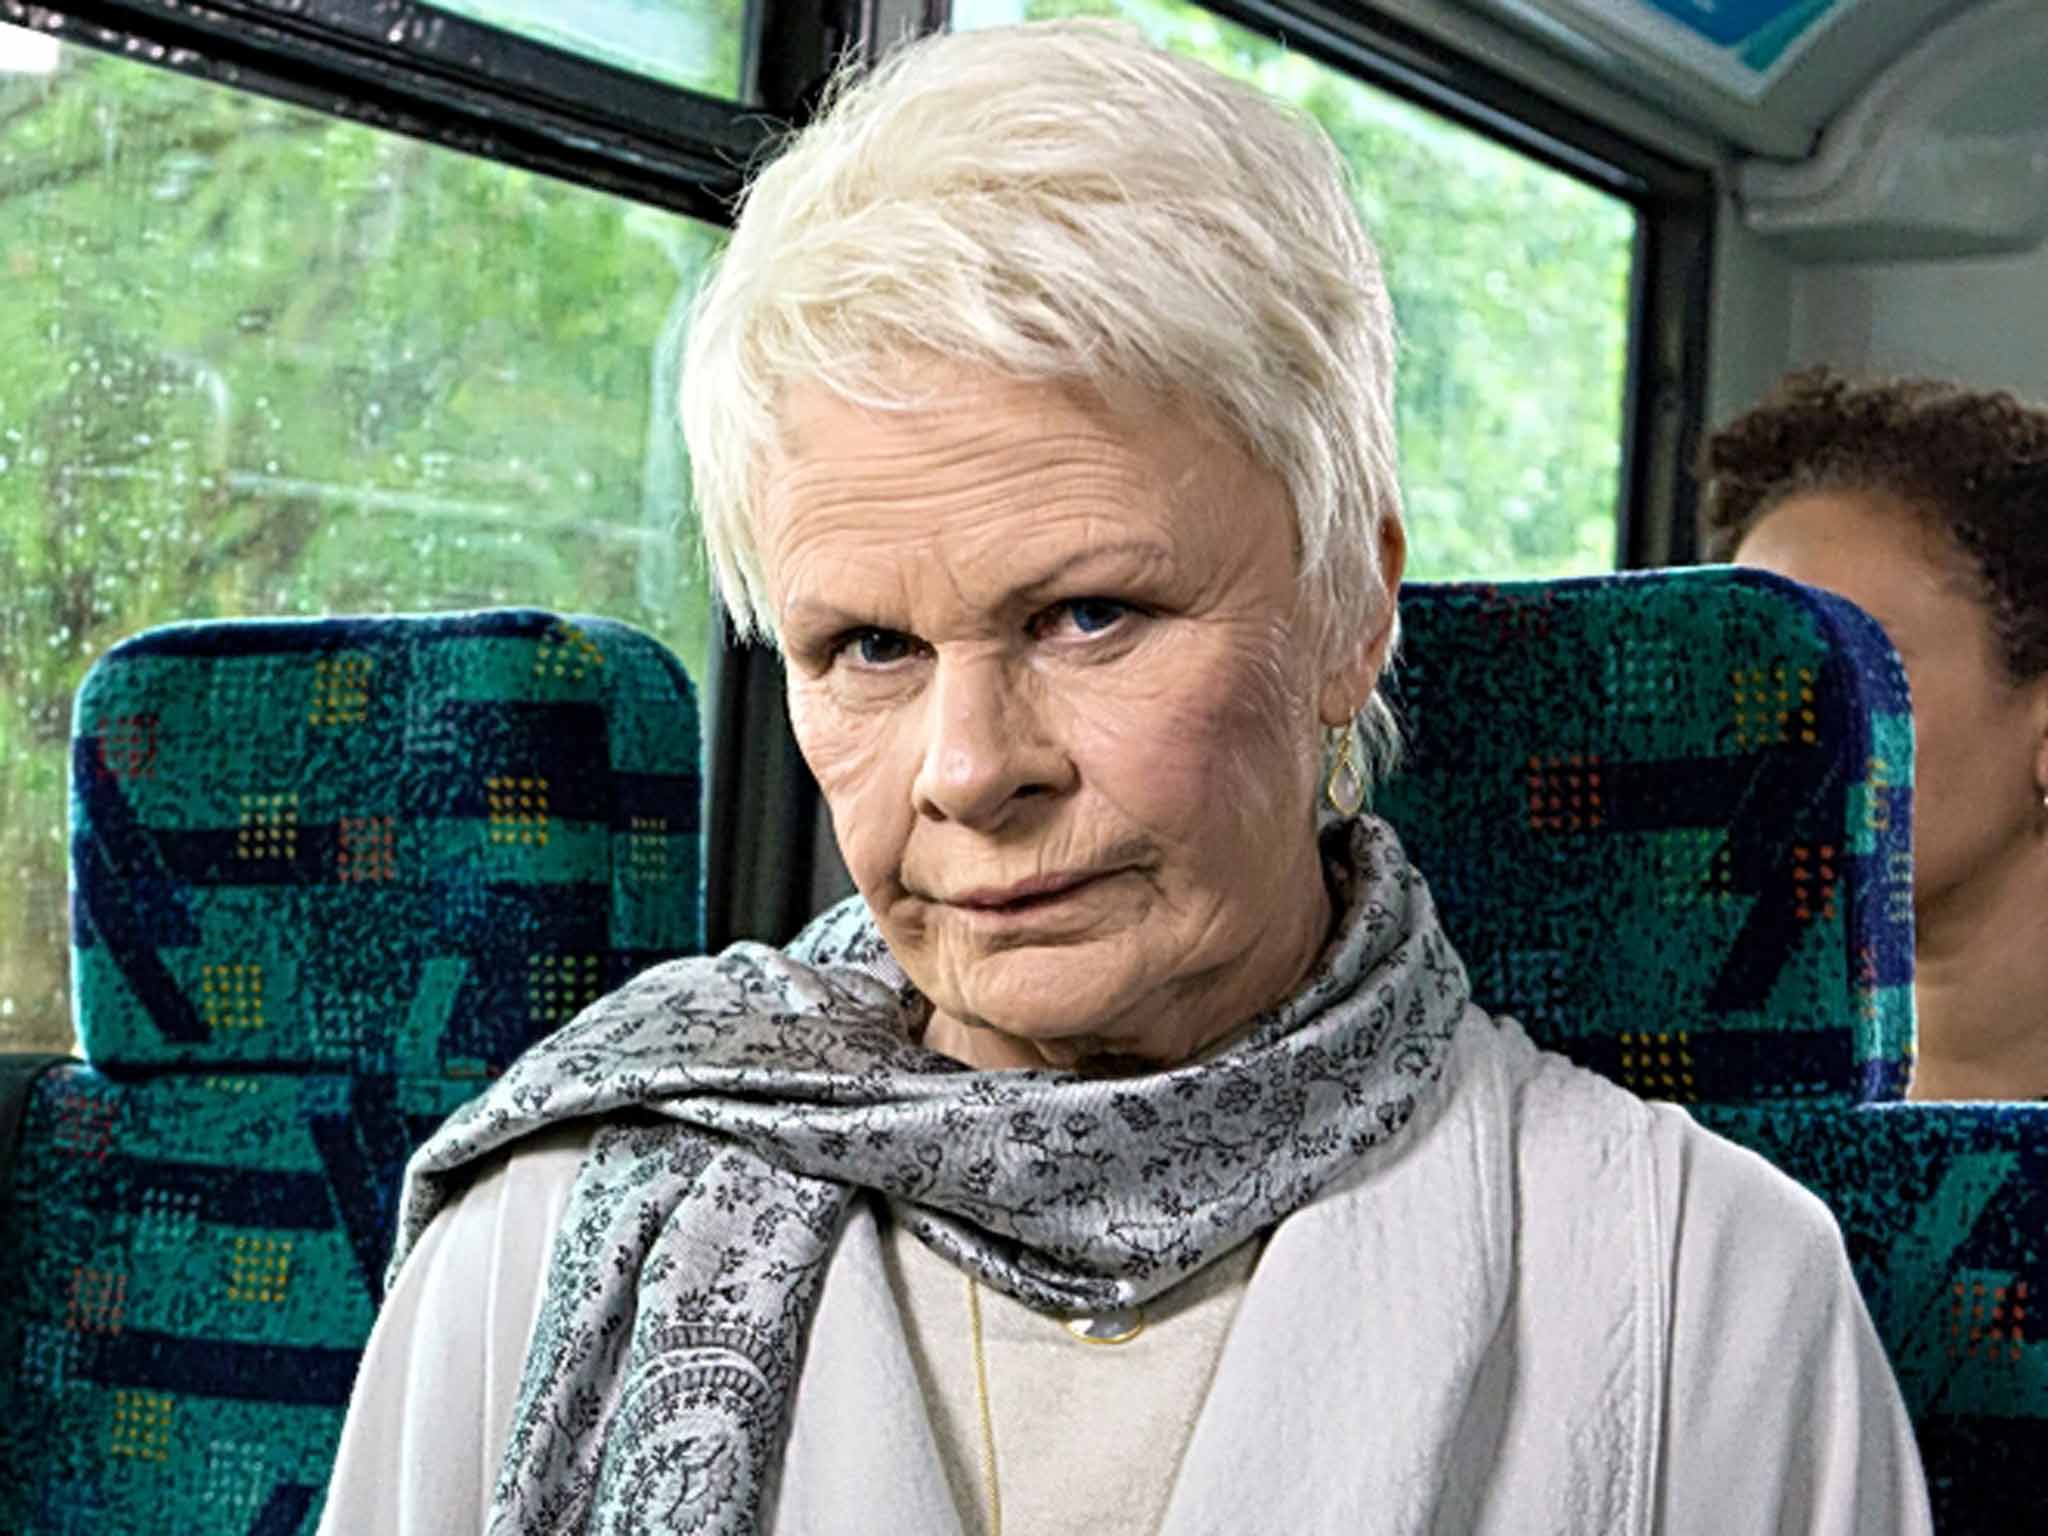 Wolf in dame's clothing: Tracey Ullman plays a shoplifting Judi Dench